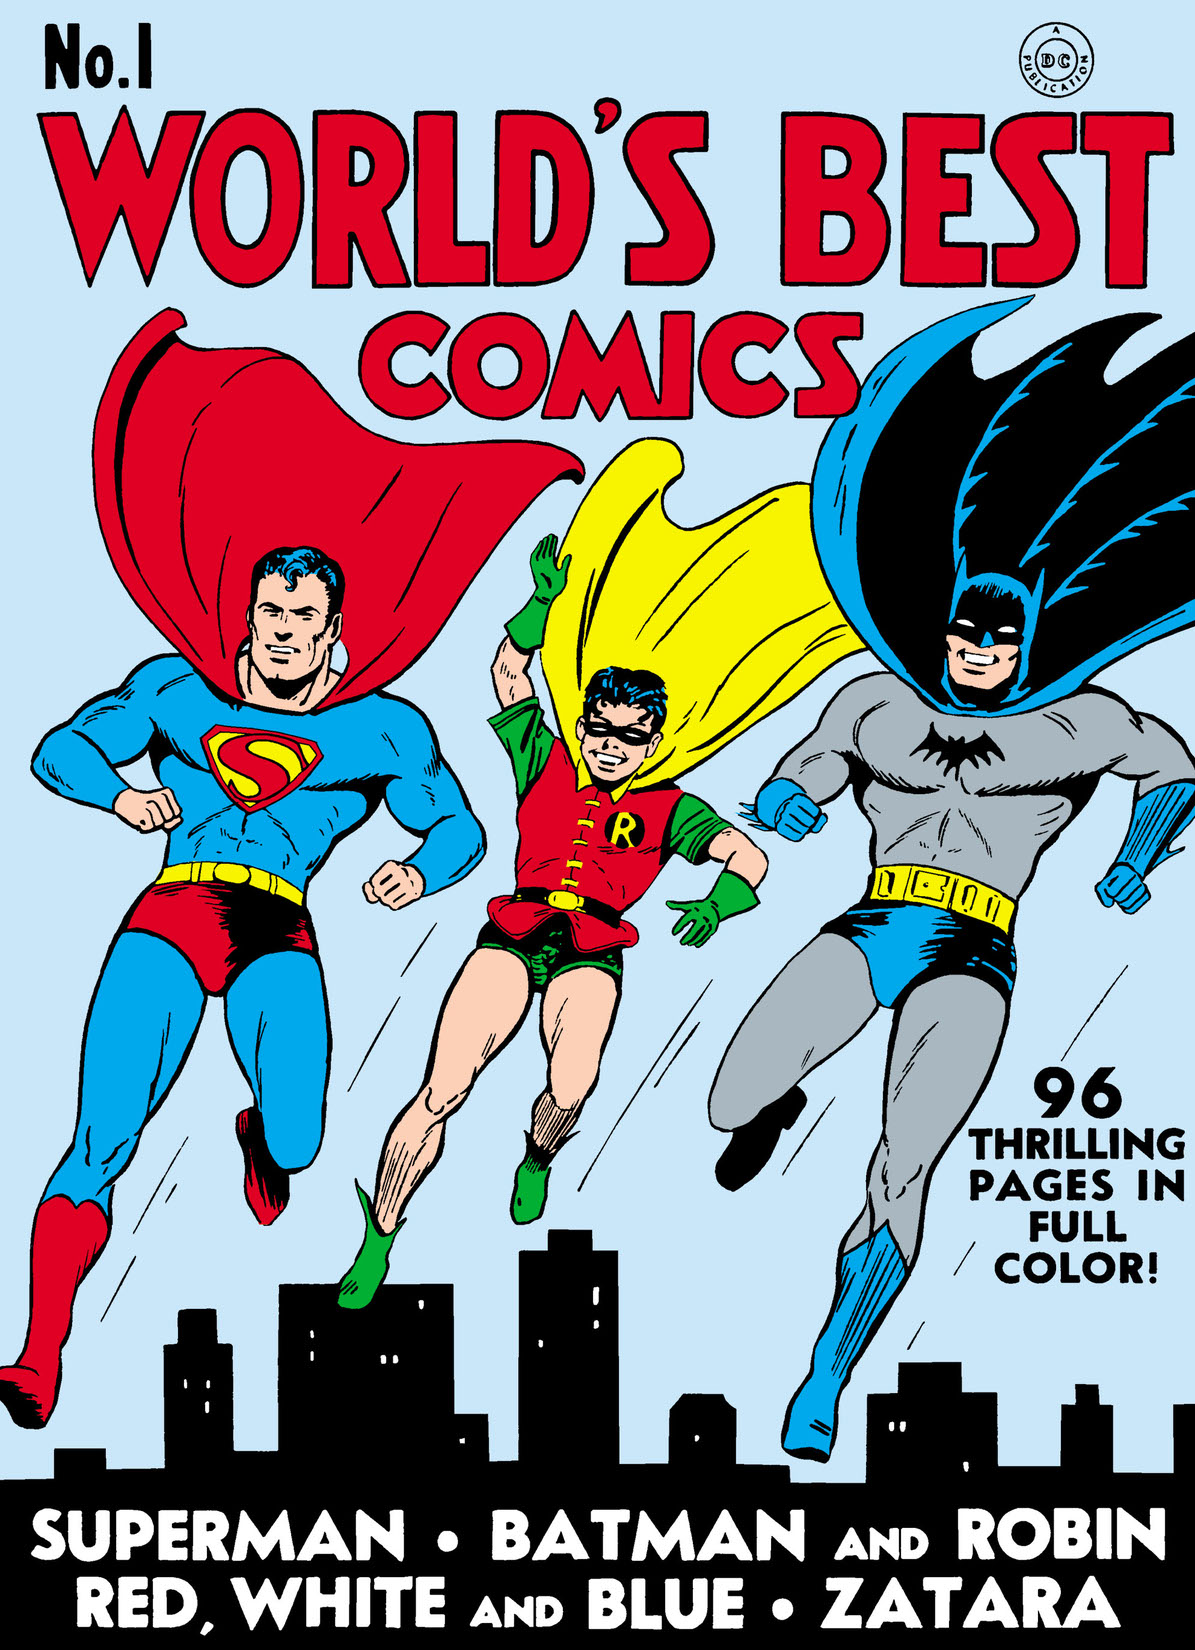 World's Best Comics (1941-) #1 preview images